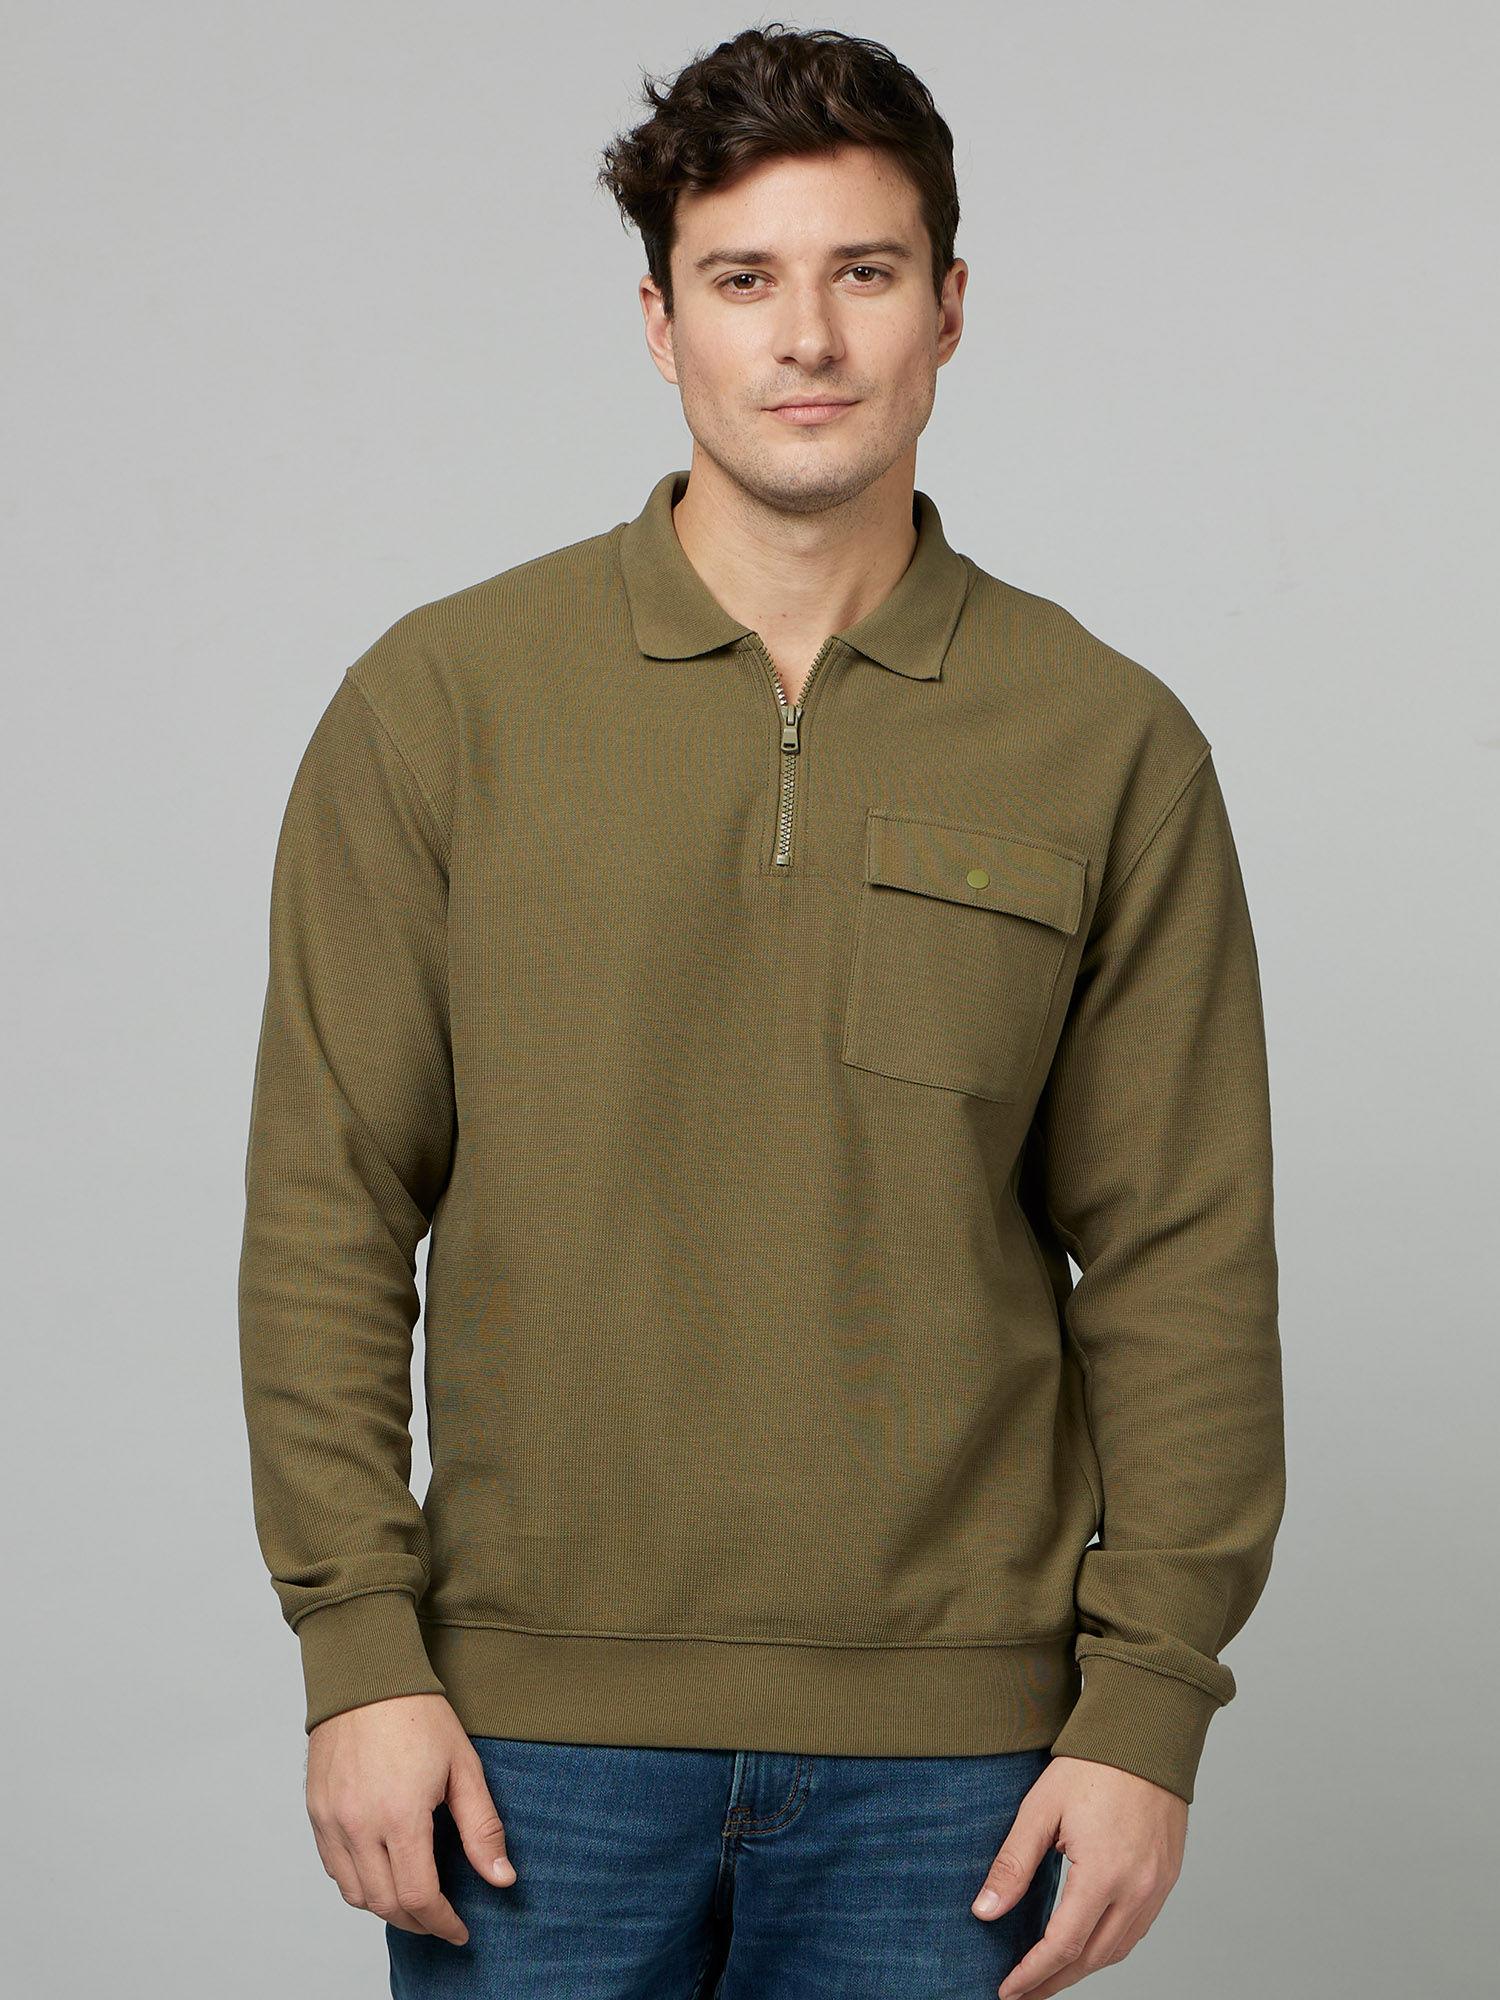 solid-green-long-sleeves-collar-neck-sweater